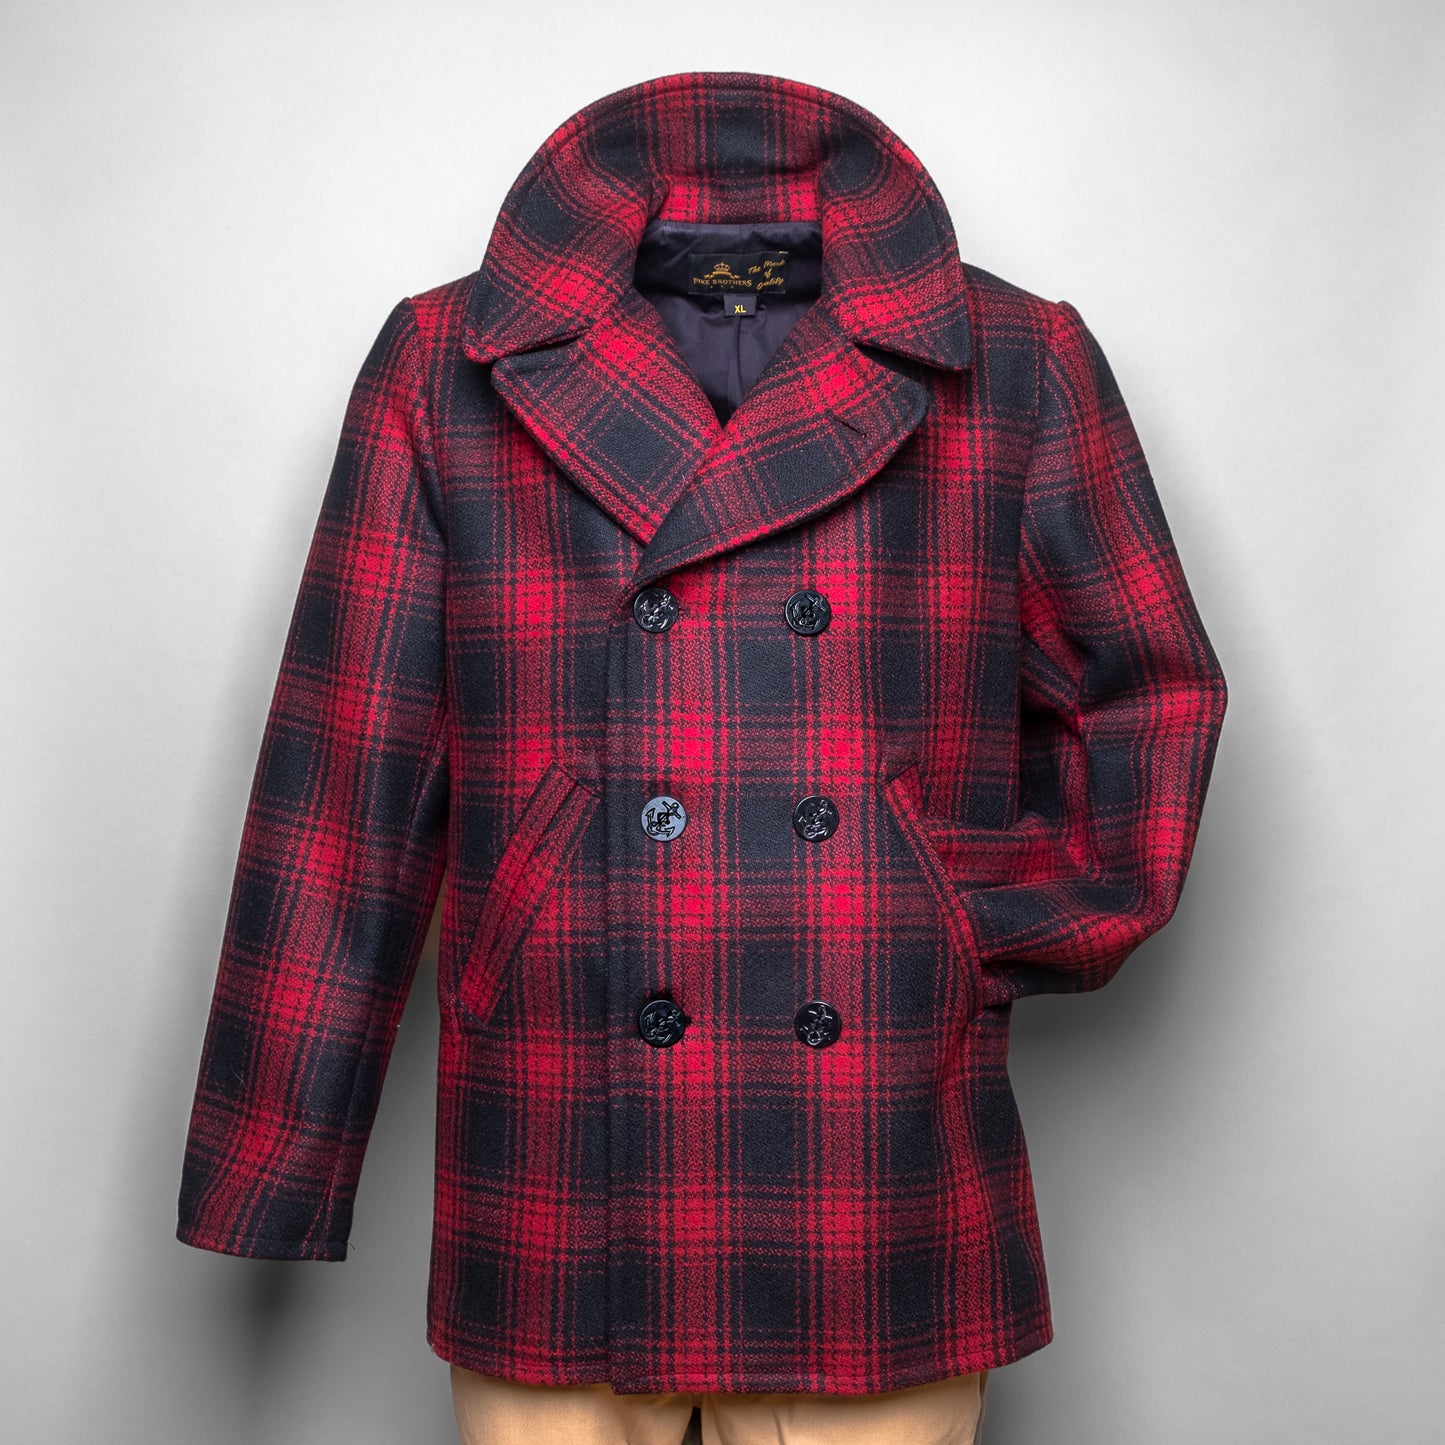 PIKE BROTHERS - 1938 PEA COAT Red Check WOOL